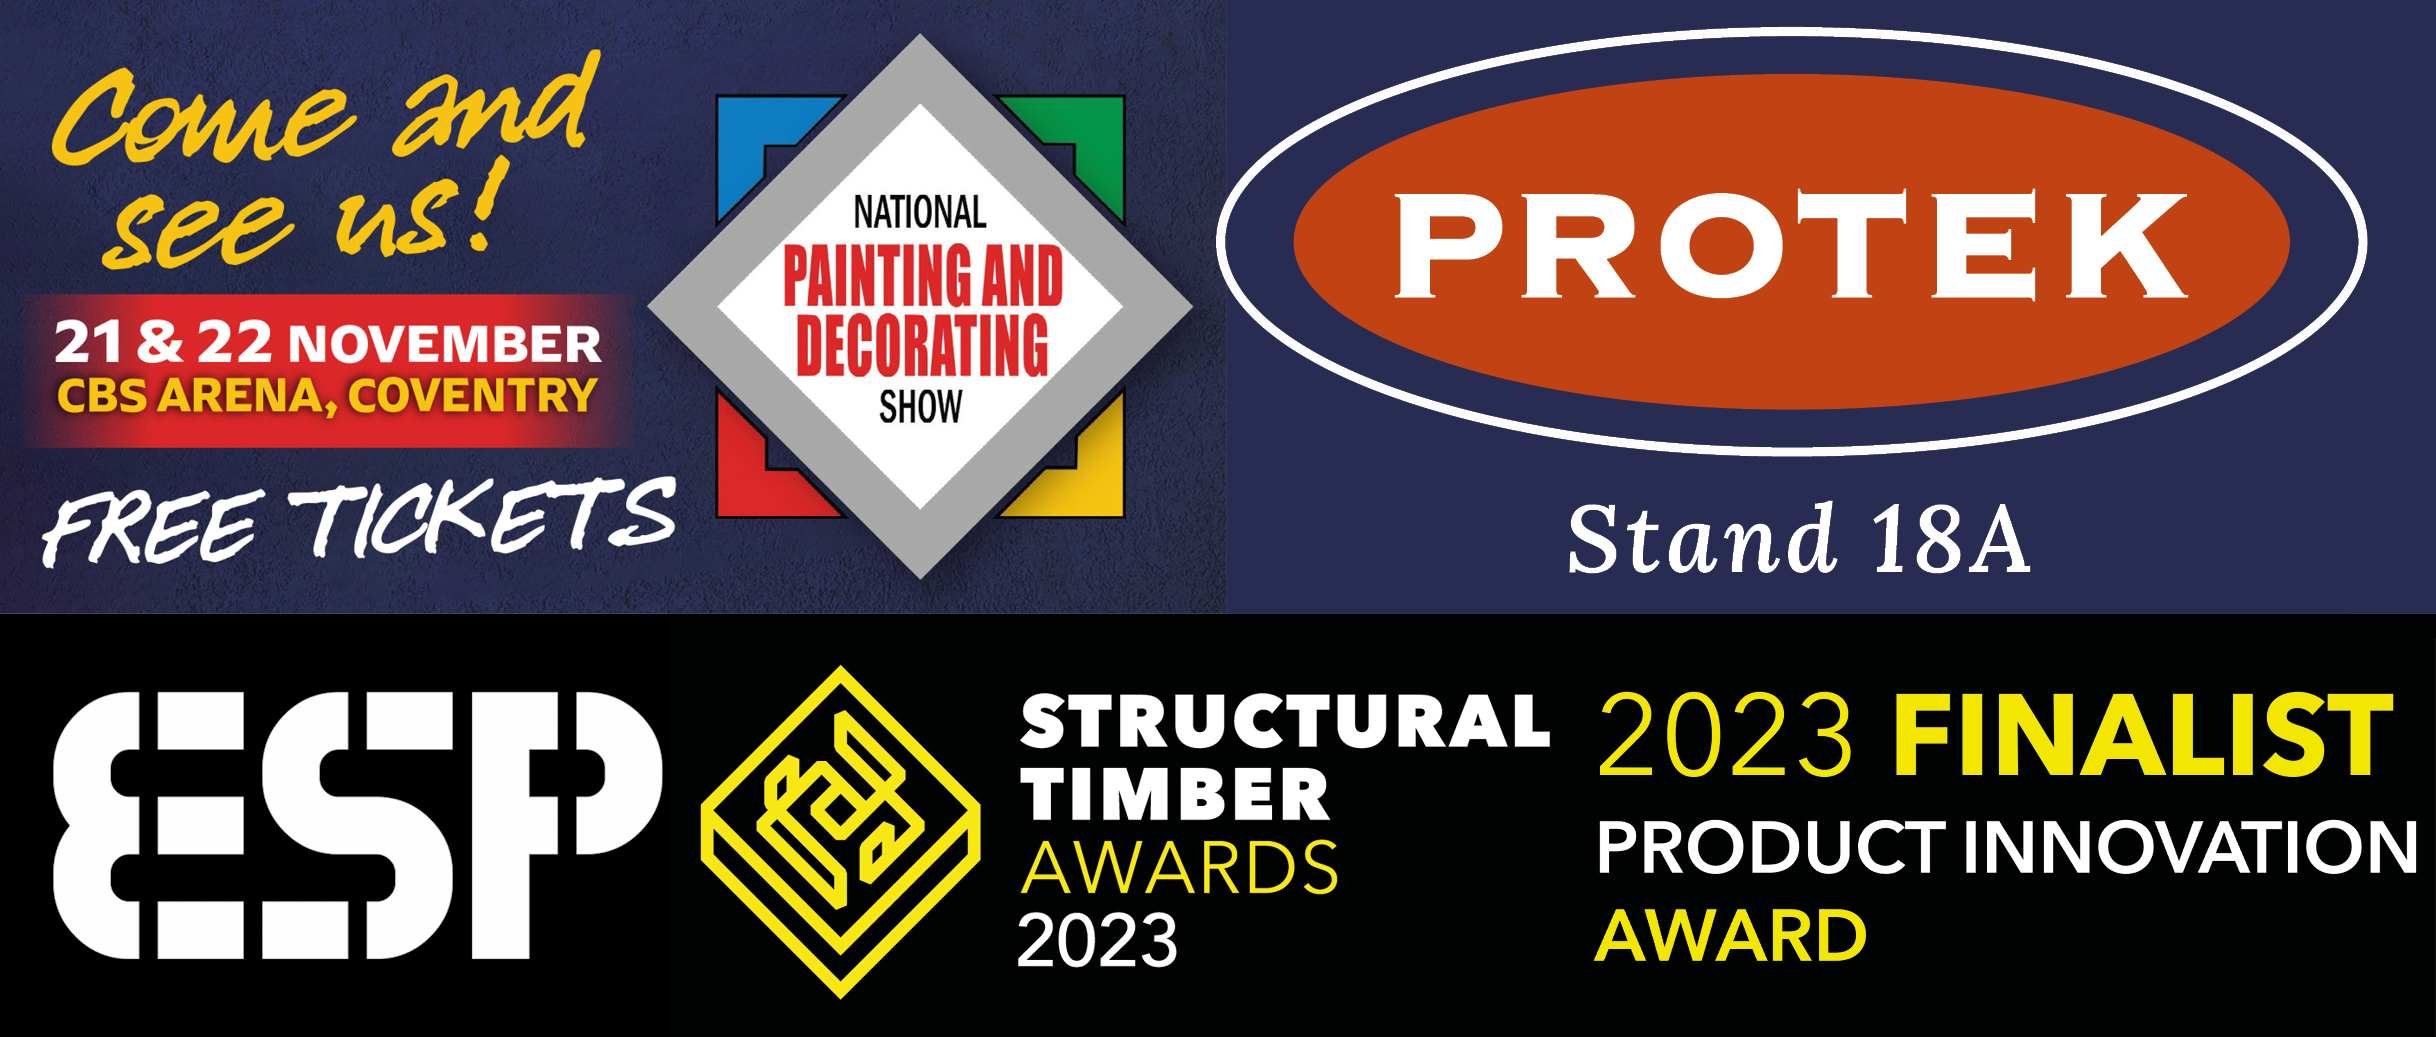 Protek Products at the National Painting and Decorating Show from 21st-22nd November at the CBS Arena in Coventry at Stand 18A